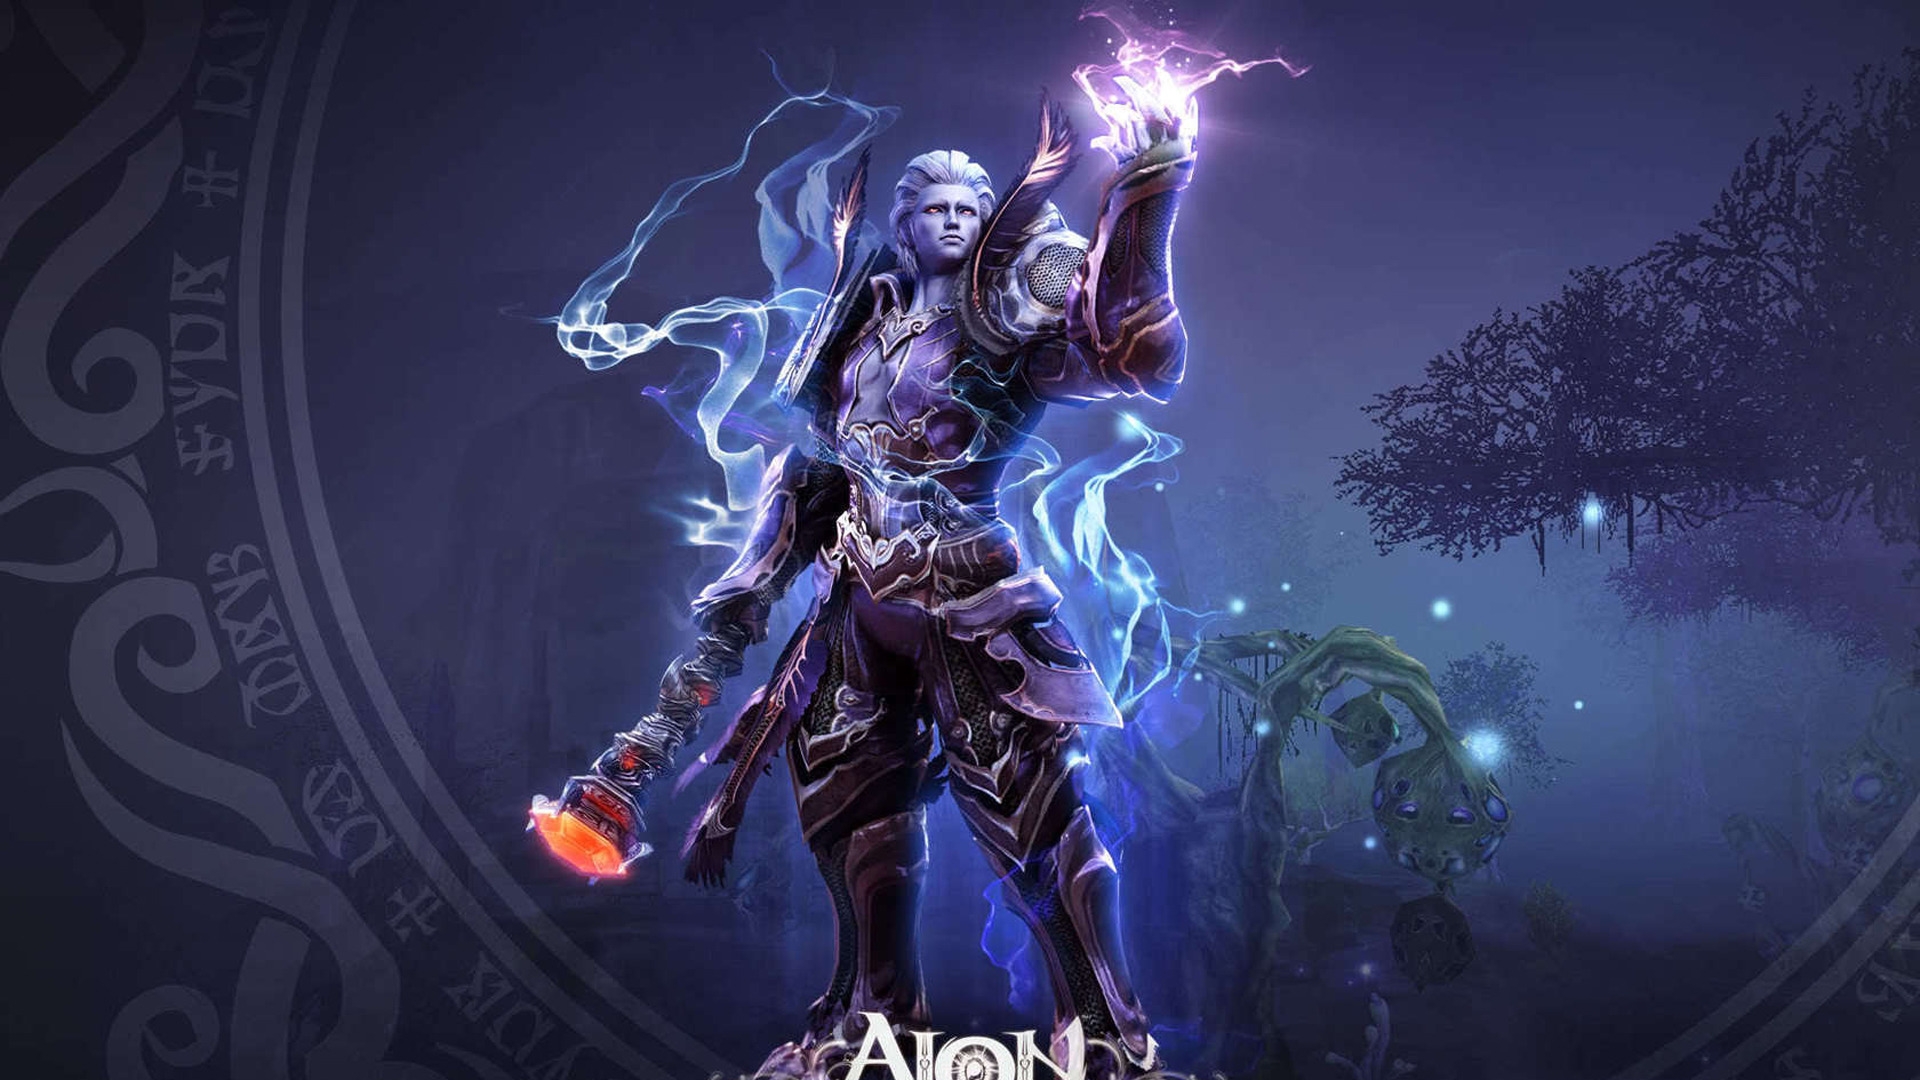 Aion The Tower of Eternity Game for 1920 x 1080 HDTV 1080p resolution